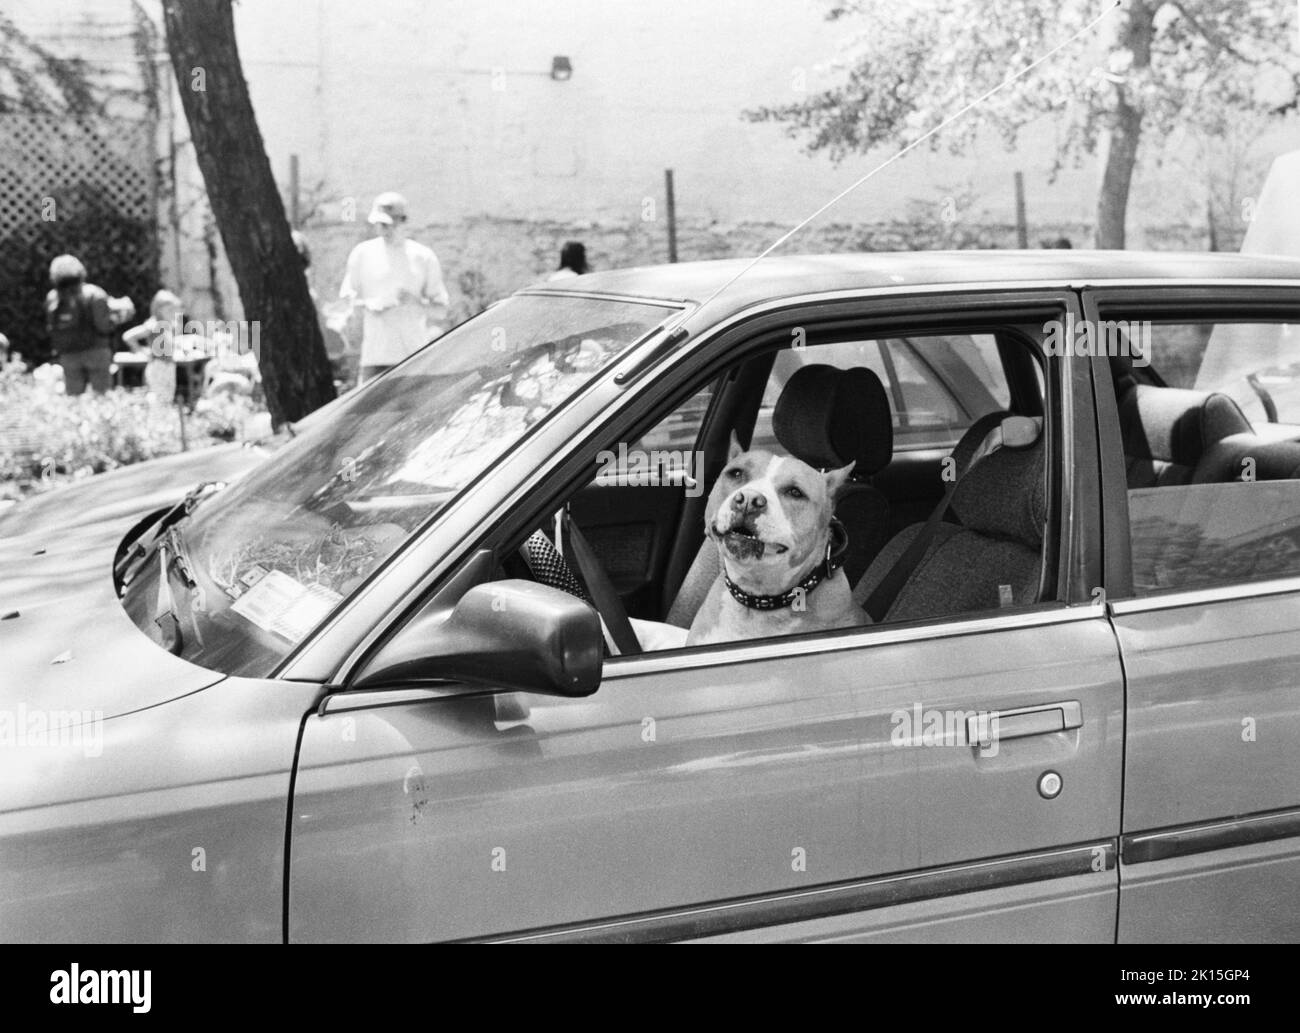 Dog in the driver's seat of a car. New York. Stock Photo